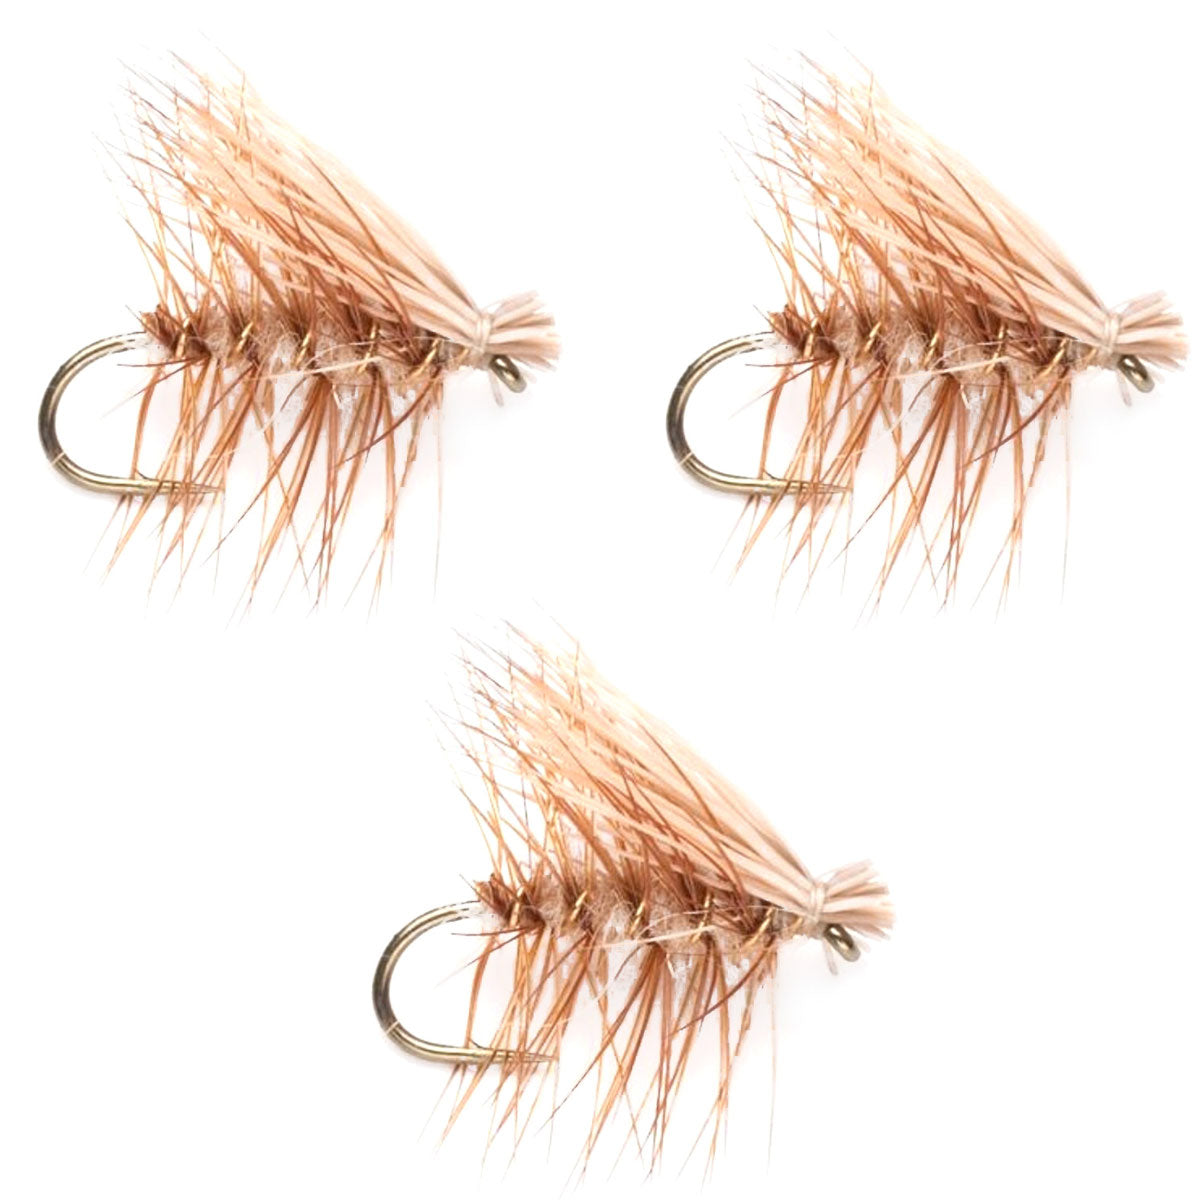 3 Pack Barbless Tan Elk Hair Caddis Classic Trout Dry Flies Size 14